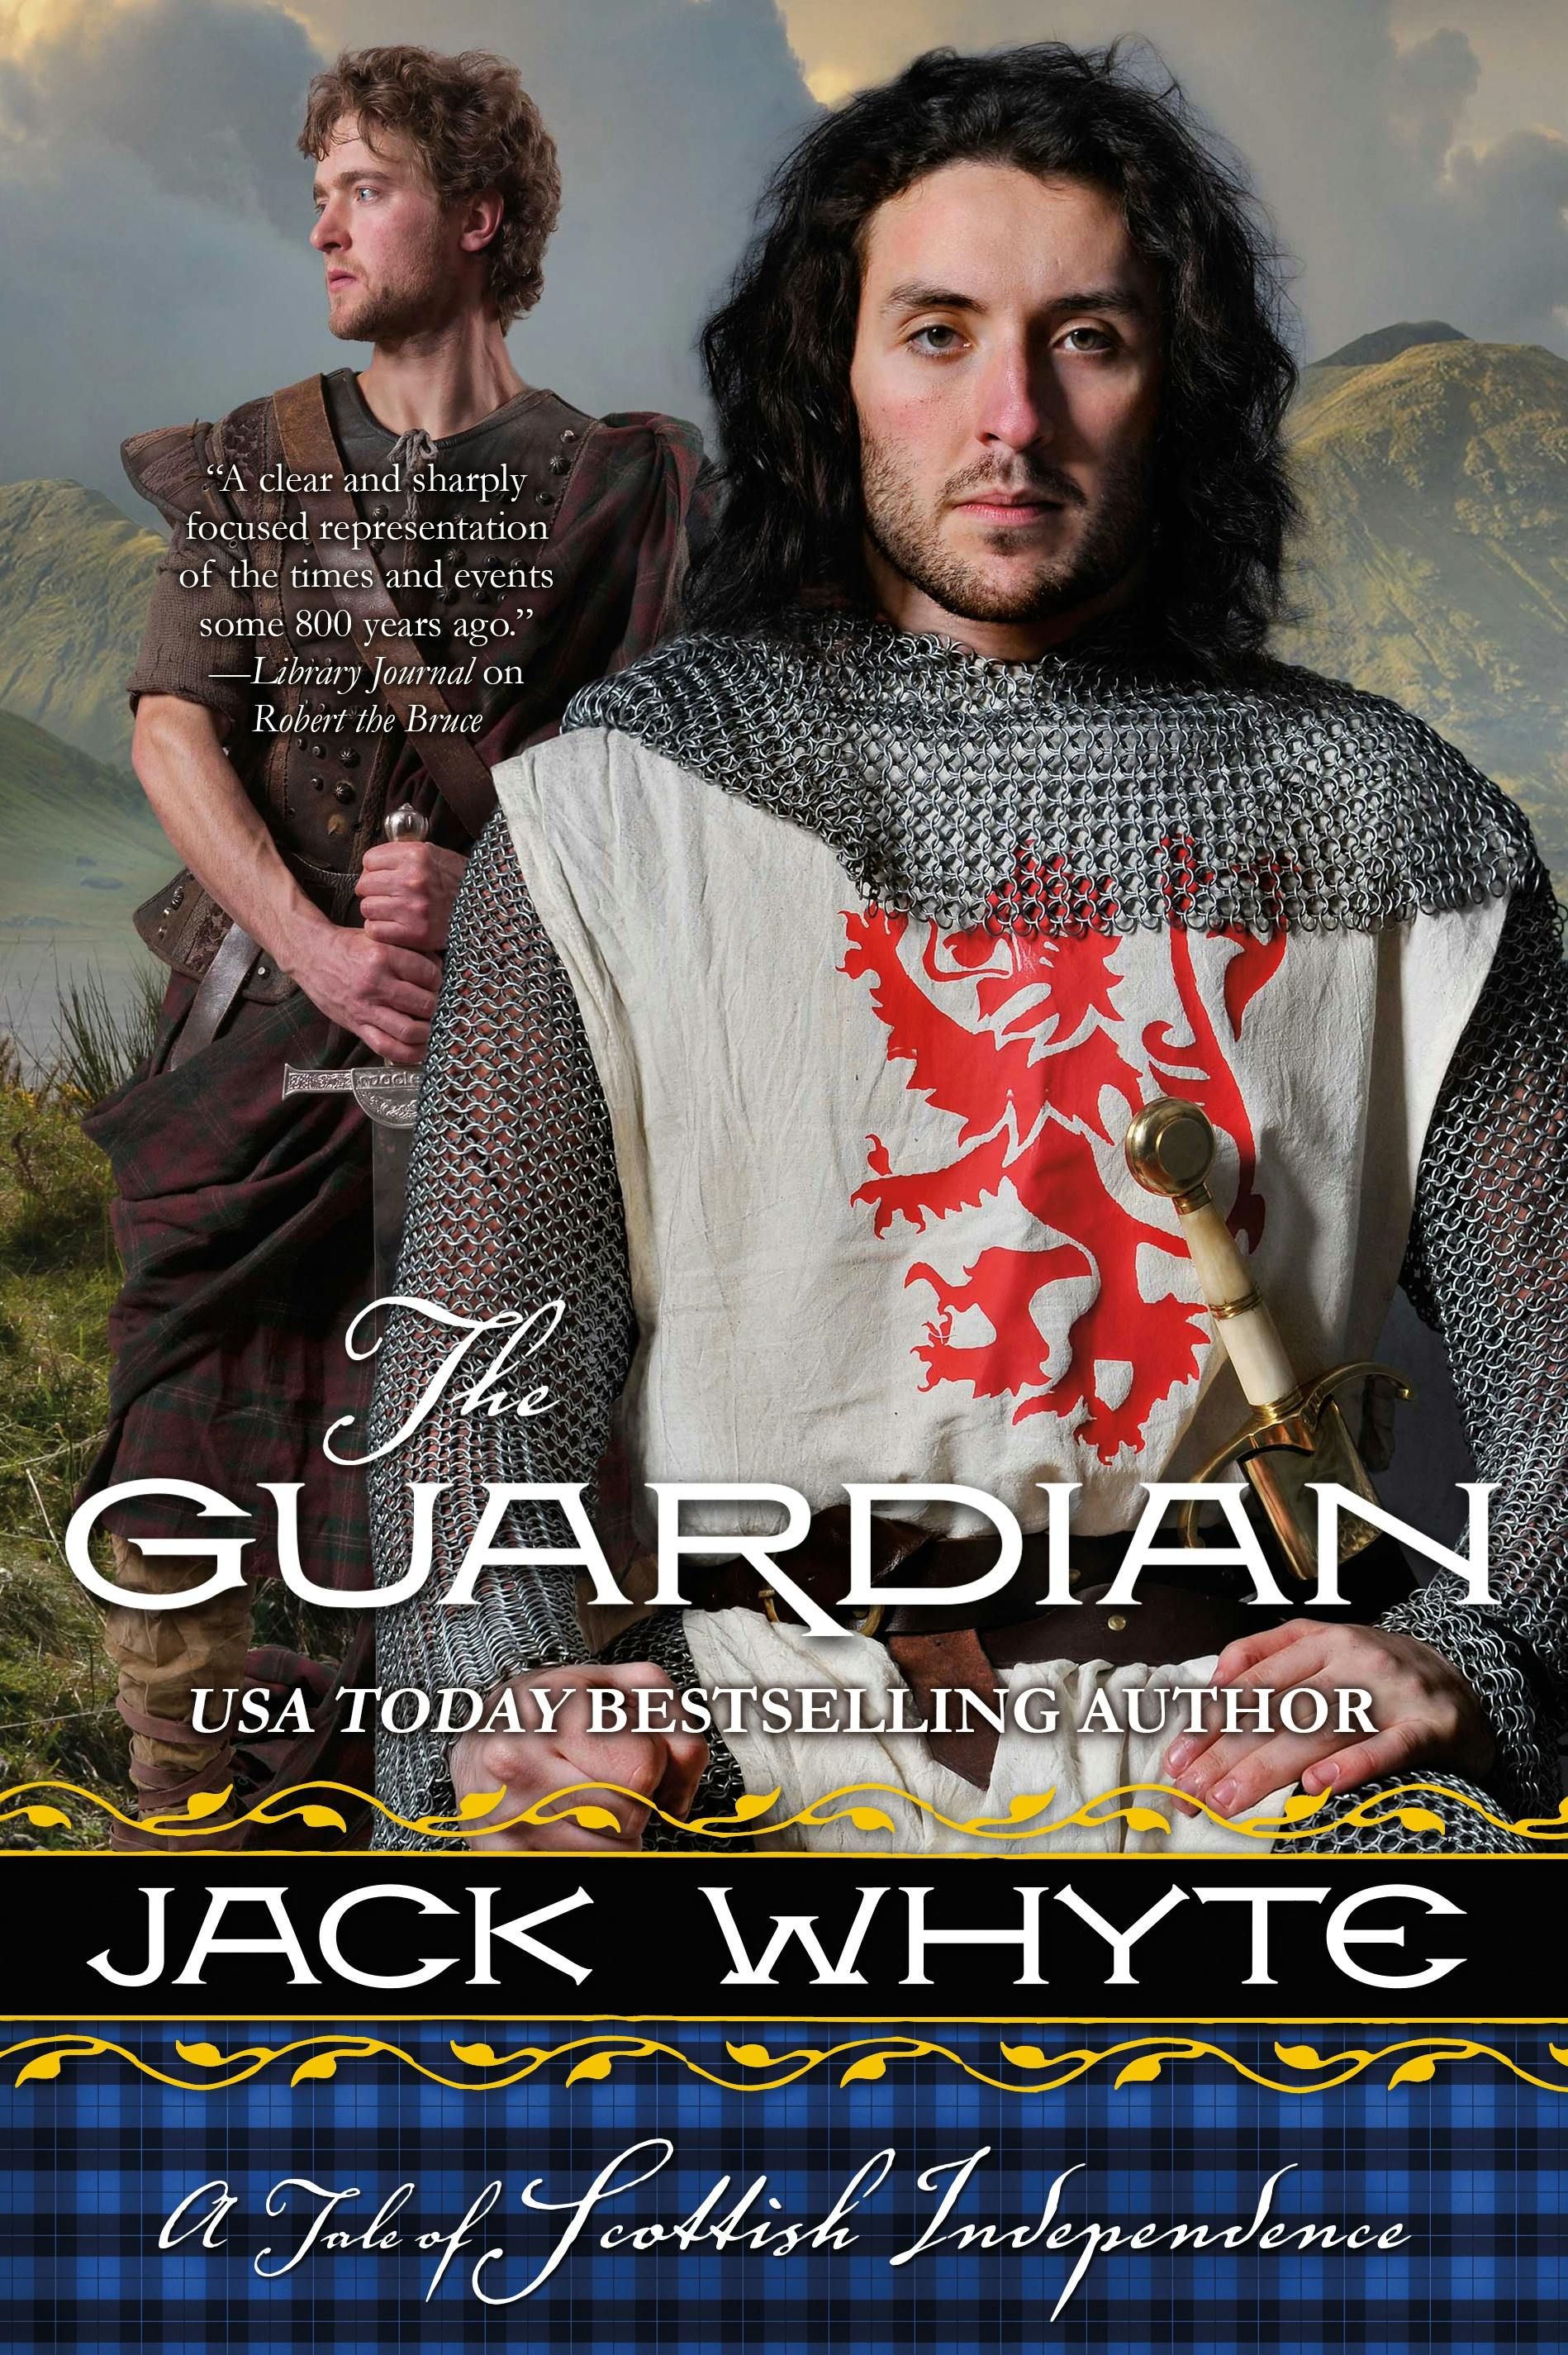 Cover for the book titled as: The Guardian